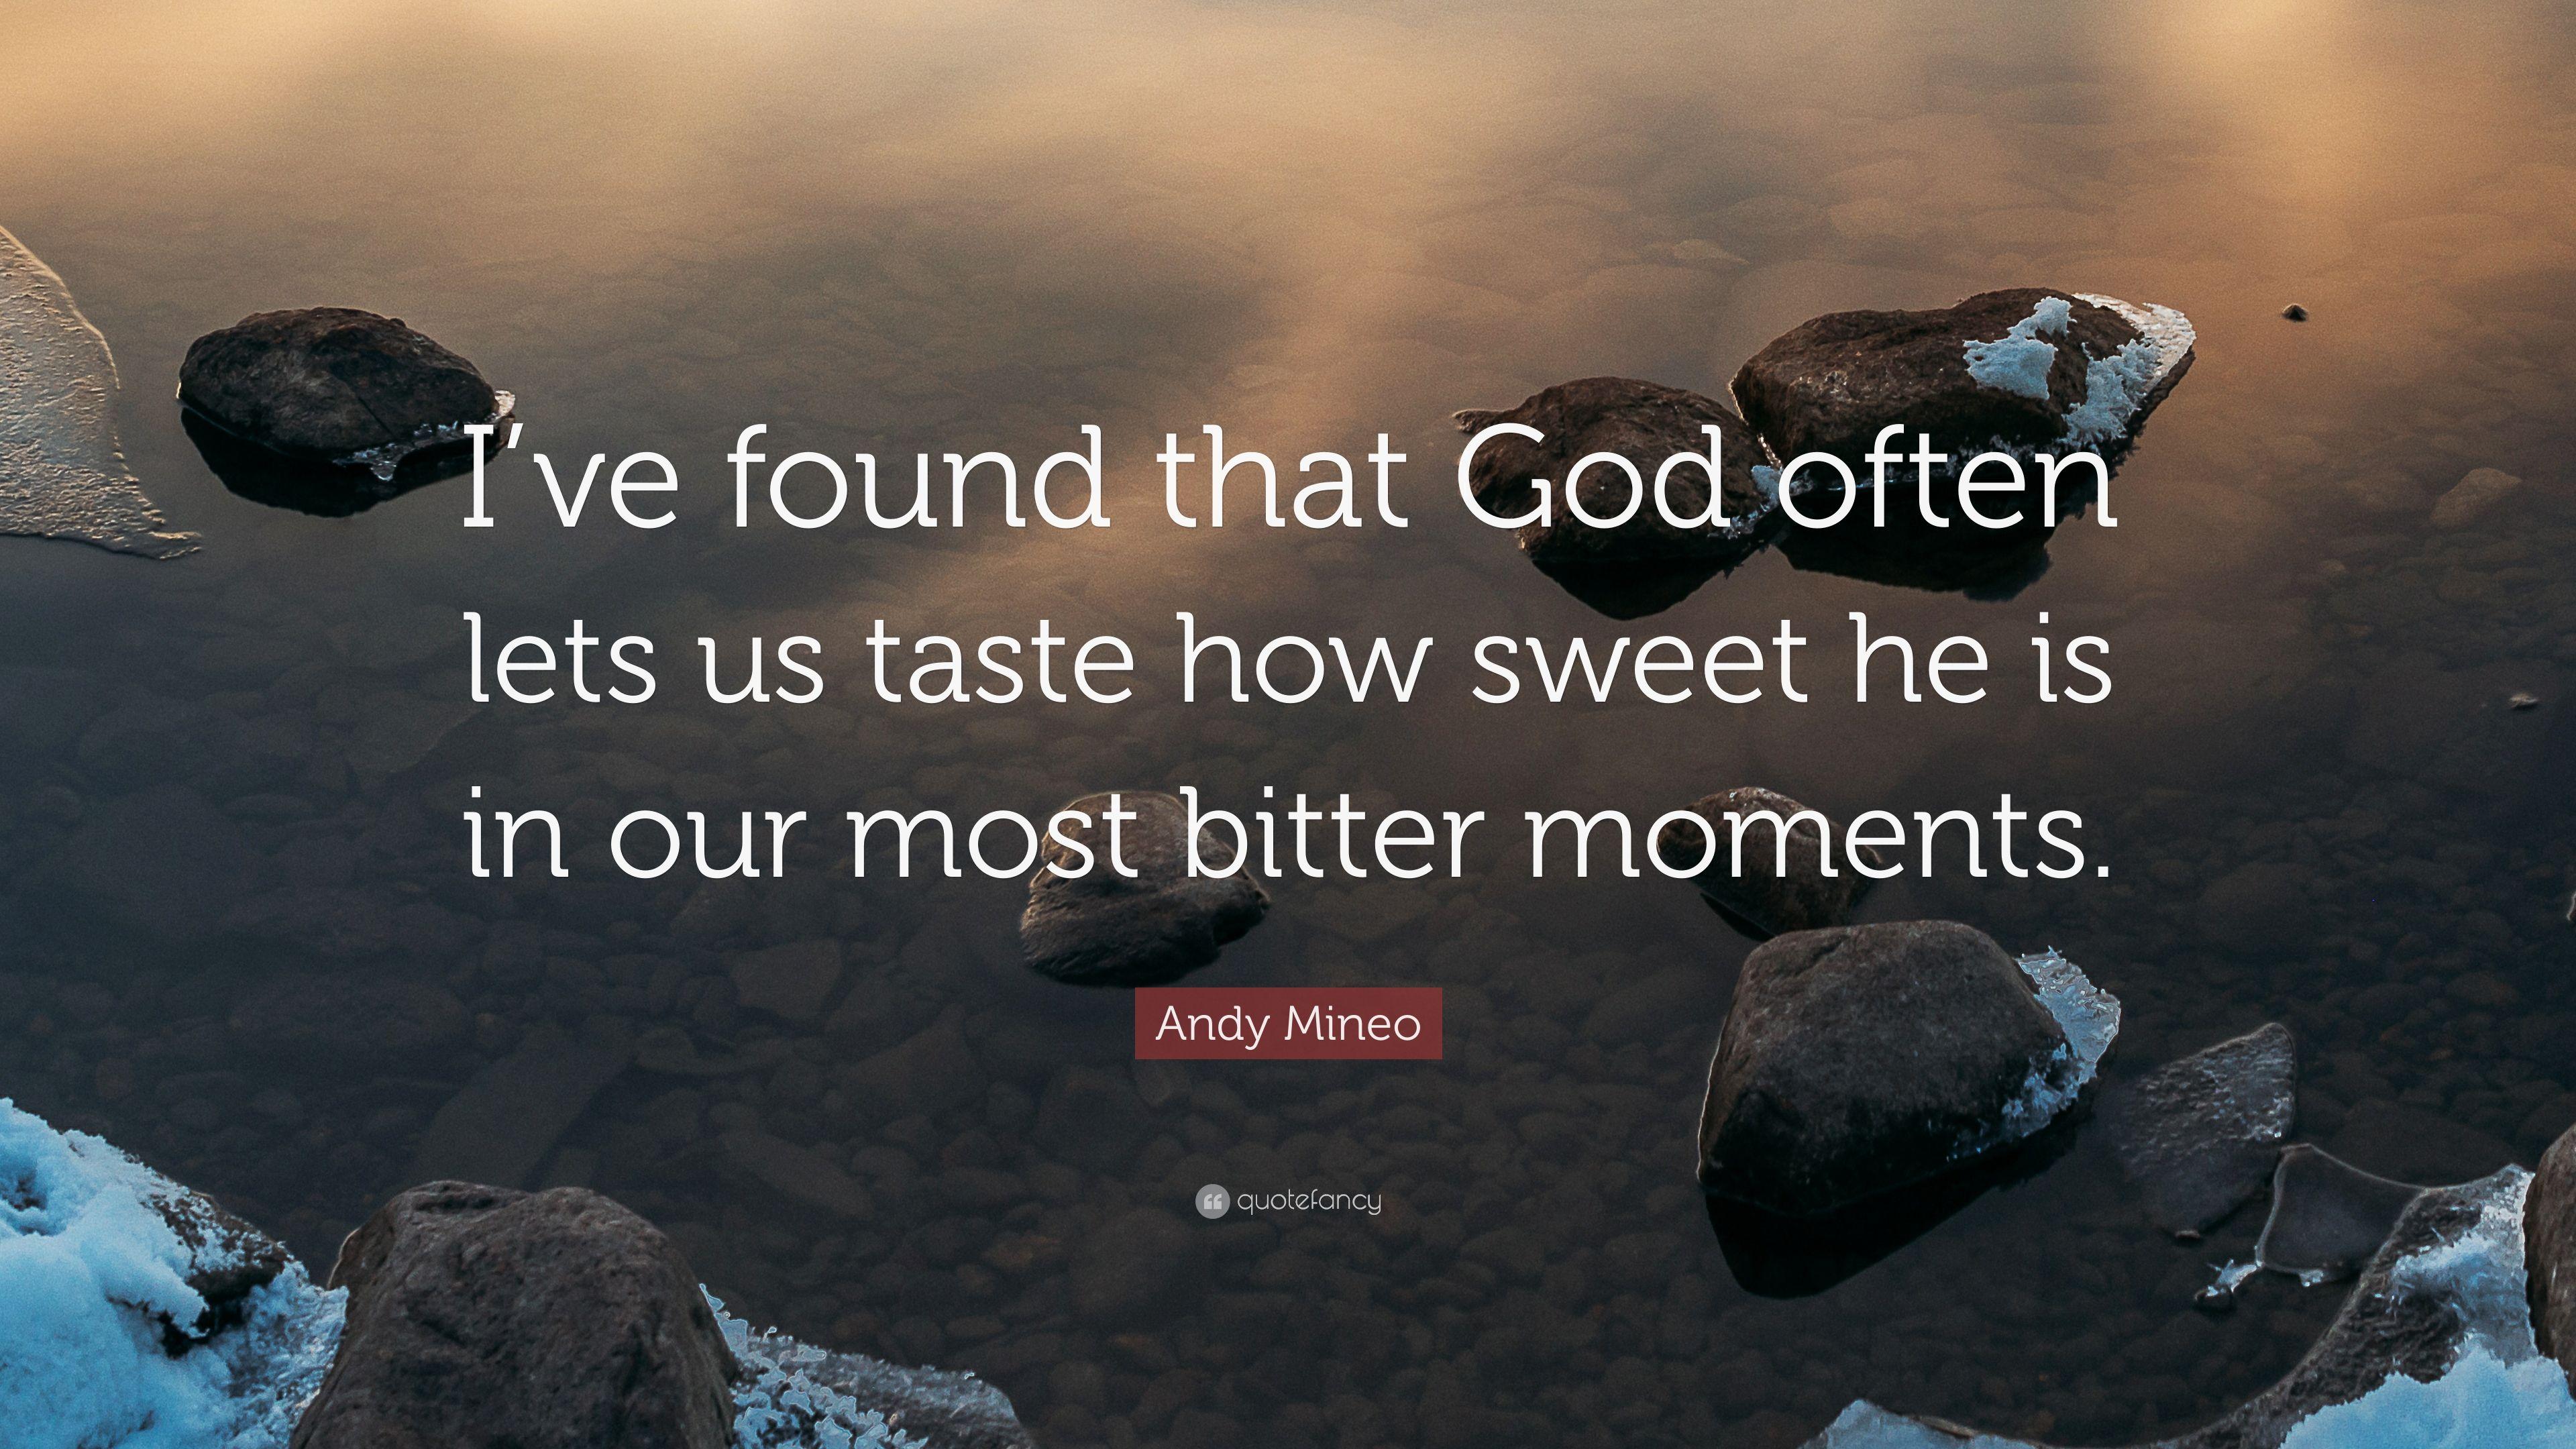 Andy Mineo Quote: "I've found that God often lets us taste how sw...